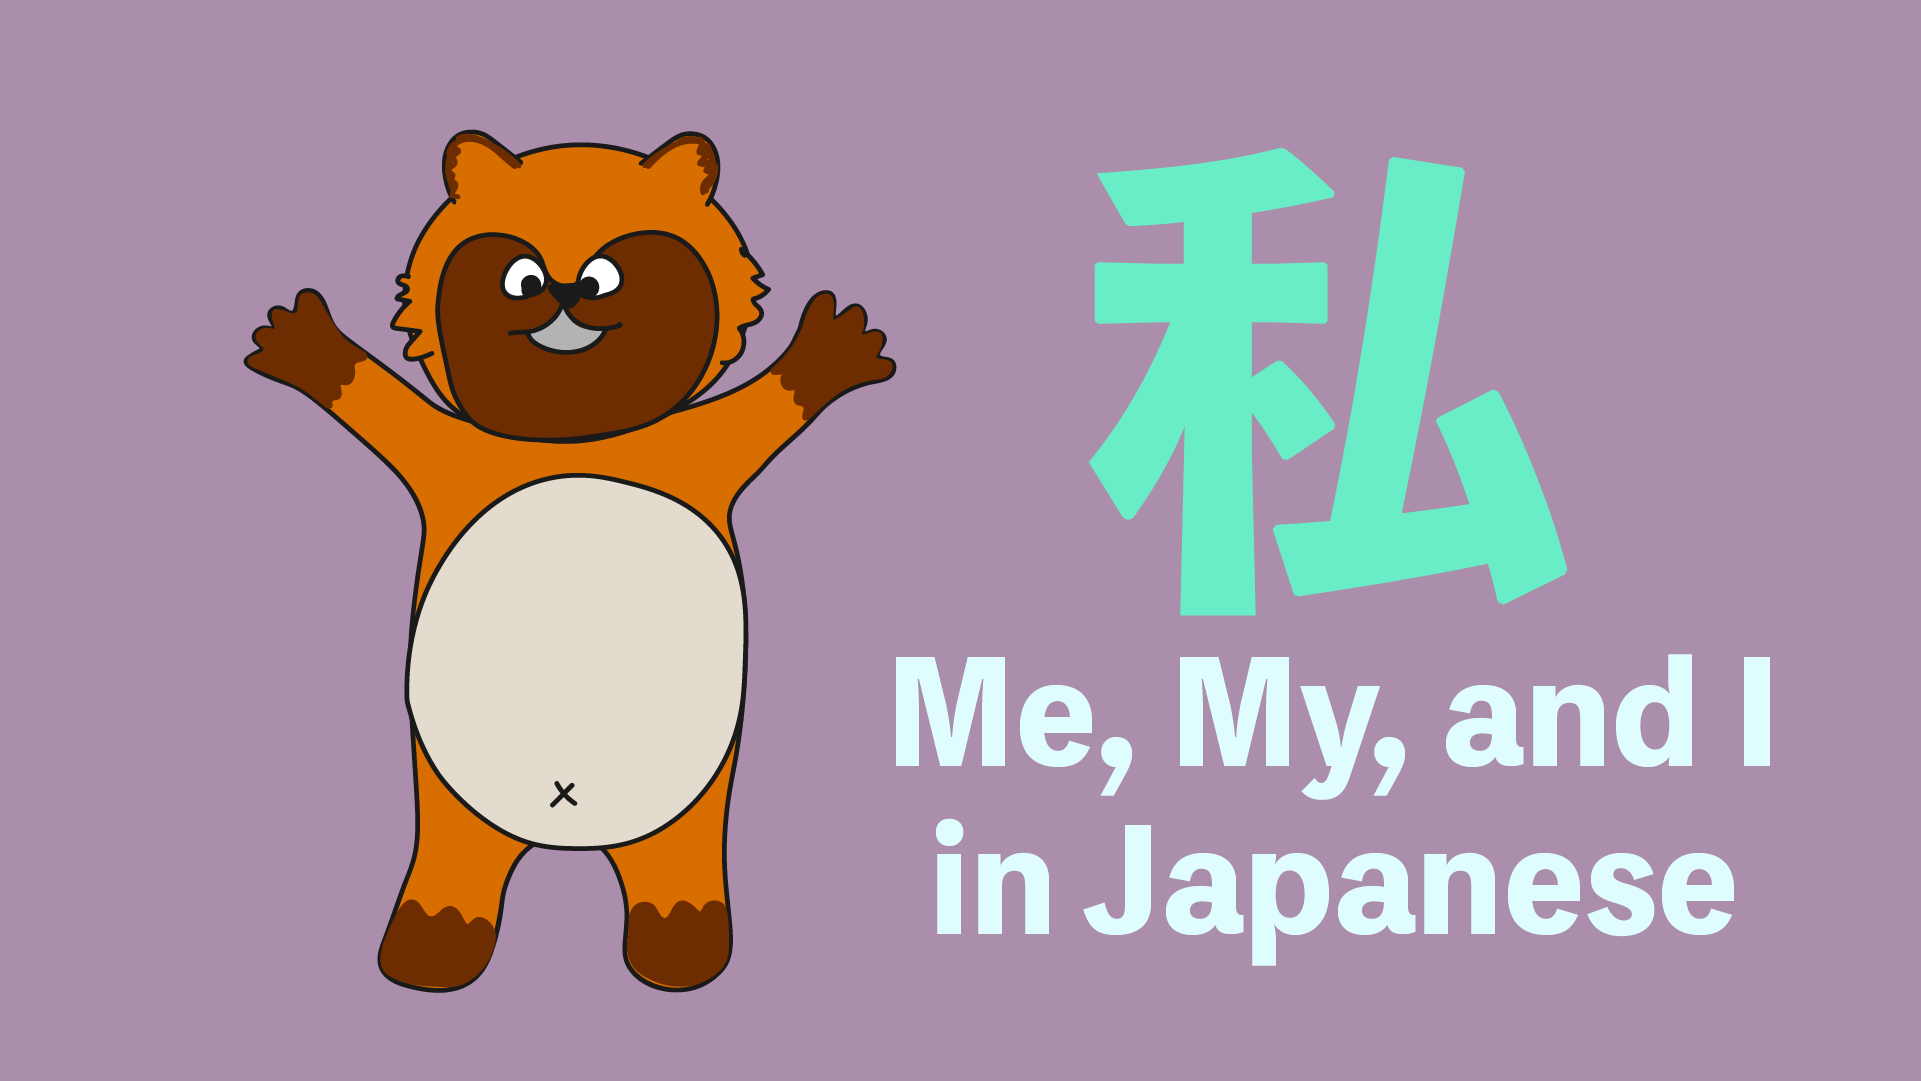 Watashi? Ore? The 7 ways to say “I” or “me” in Japanese